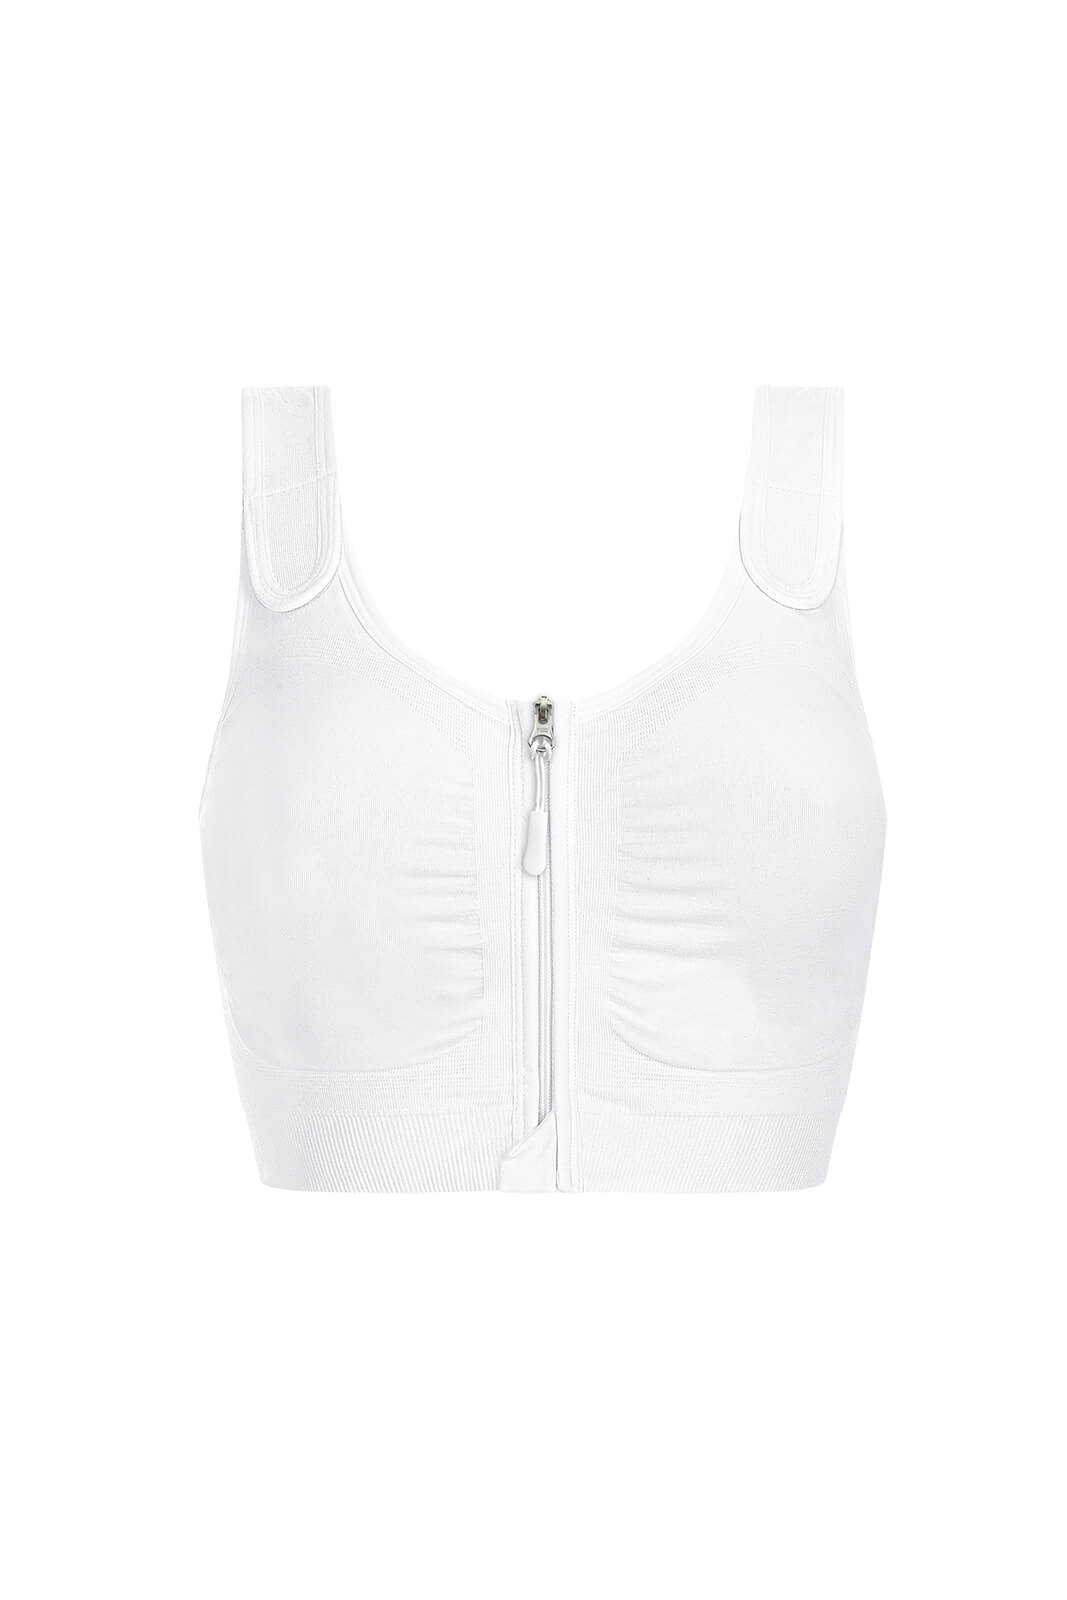 Surgery Recovery  Amoena Seamless Surgical Bra or Post Op Bra - Leyla